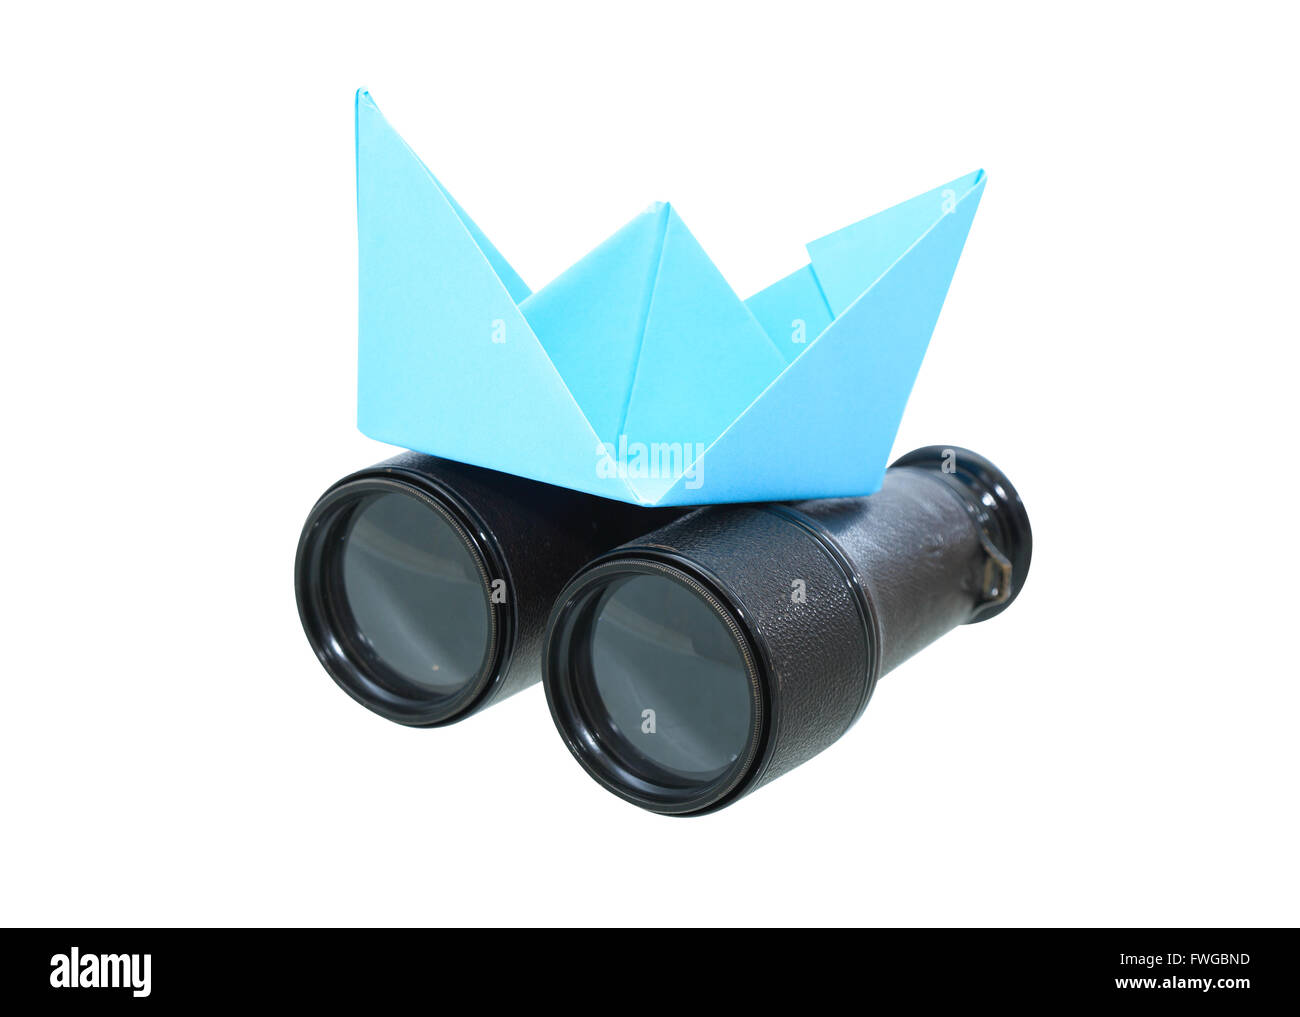 Blue paper boat and binoculars isolated on white background with clipping path Stock Photo